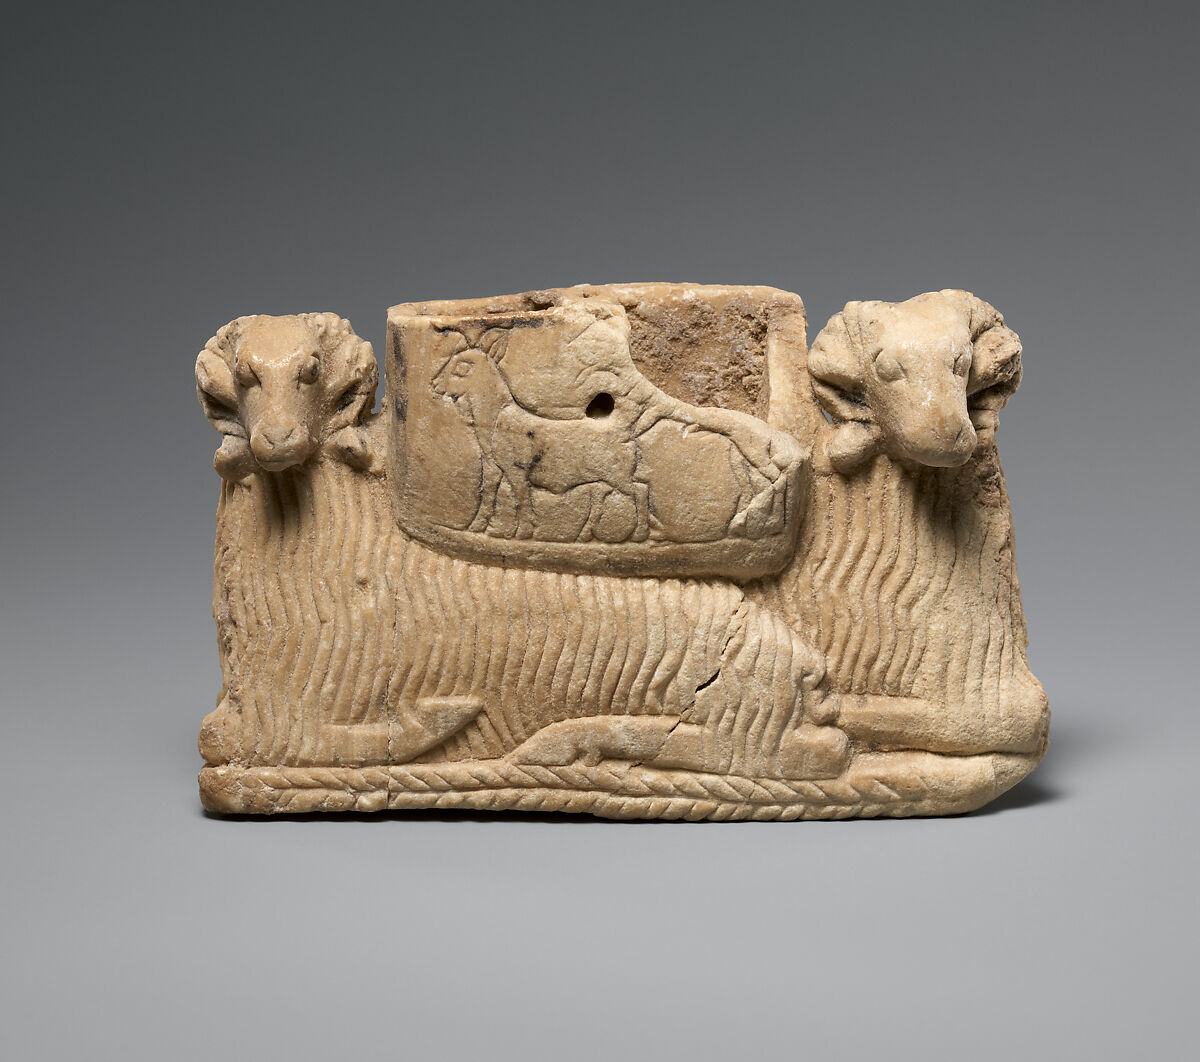 Vessel supported by two rams, Gypsum alabaster, Sumerian 